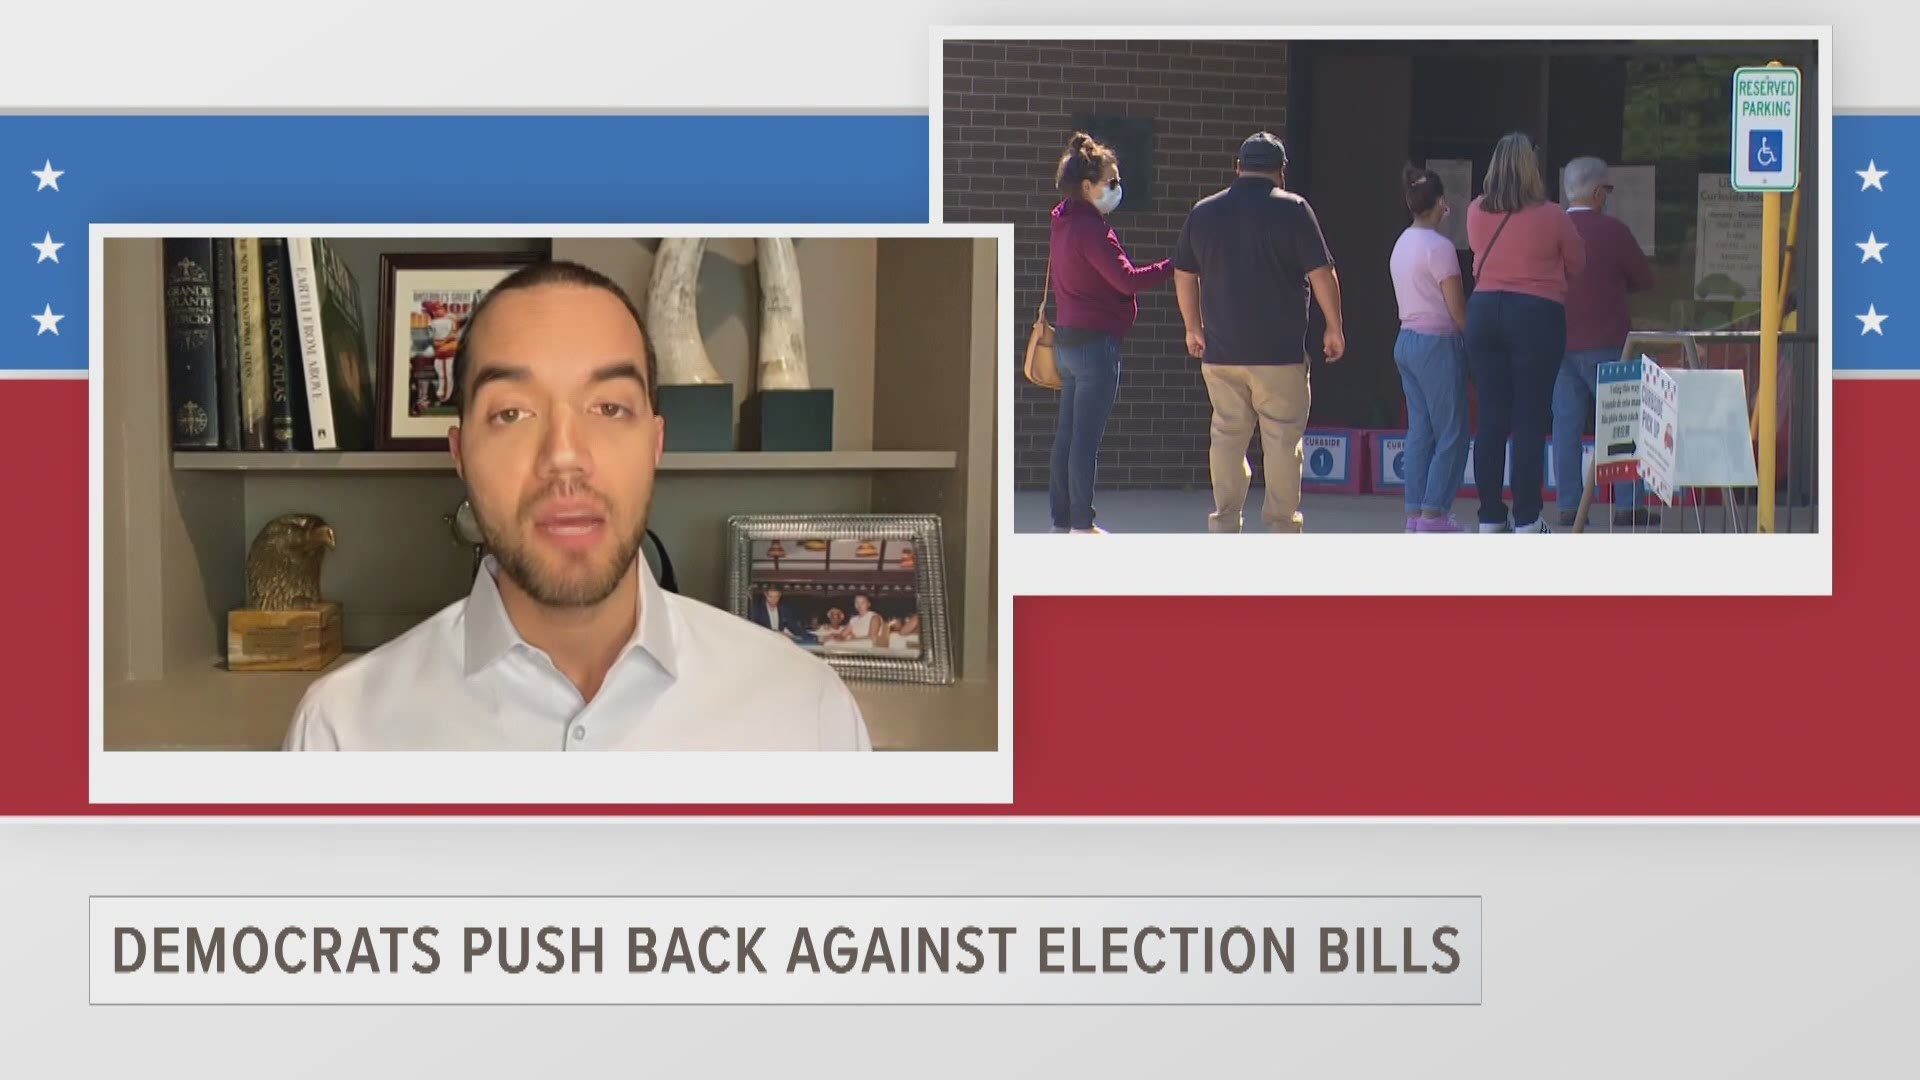 Former Harris County Clerk Chris Hollins, who helped implement changes to the elections process in Houston during the pandemic, discusses the opposition to SB7